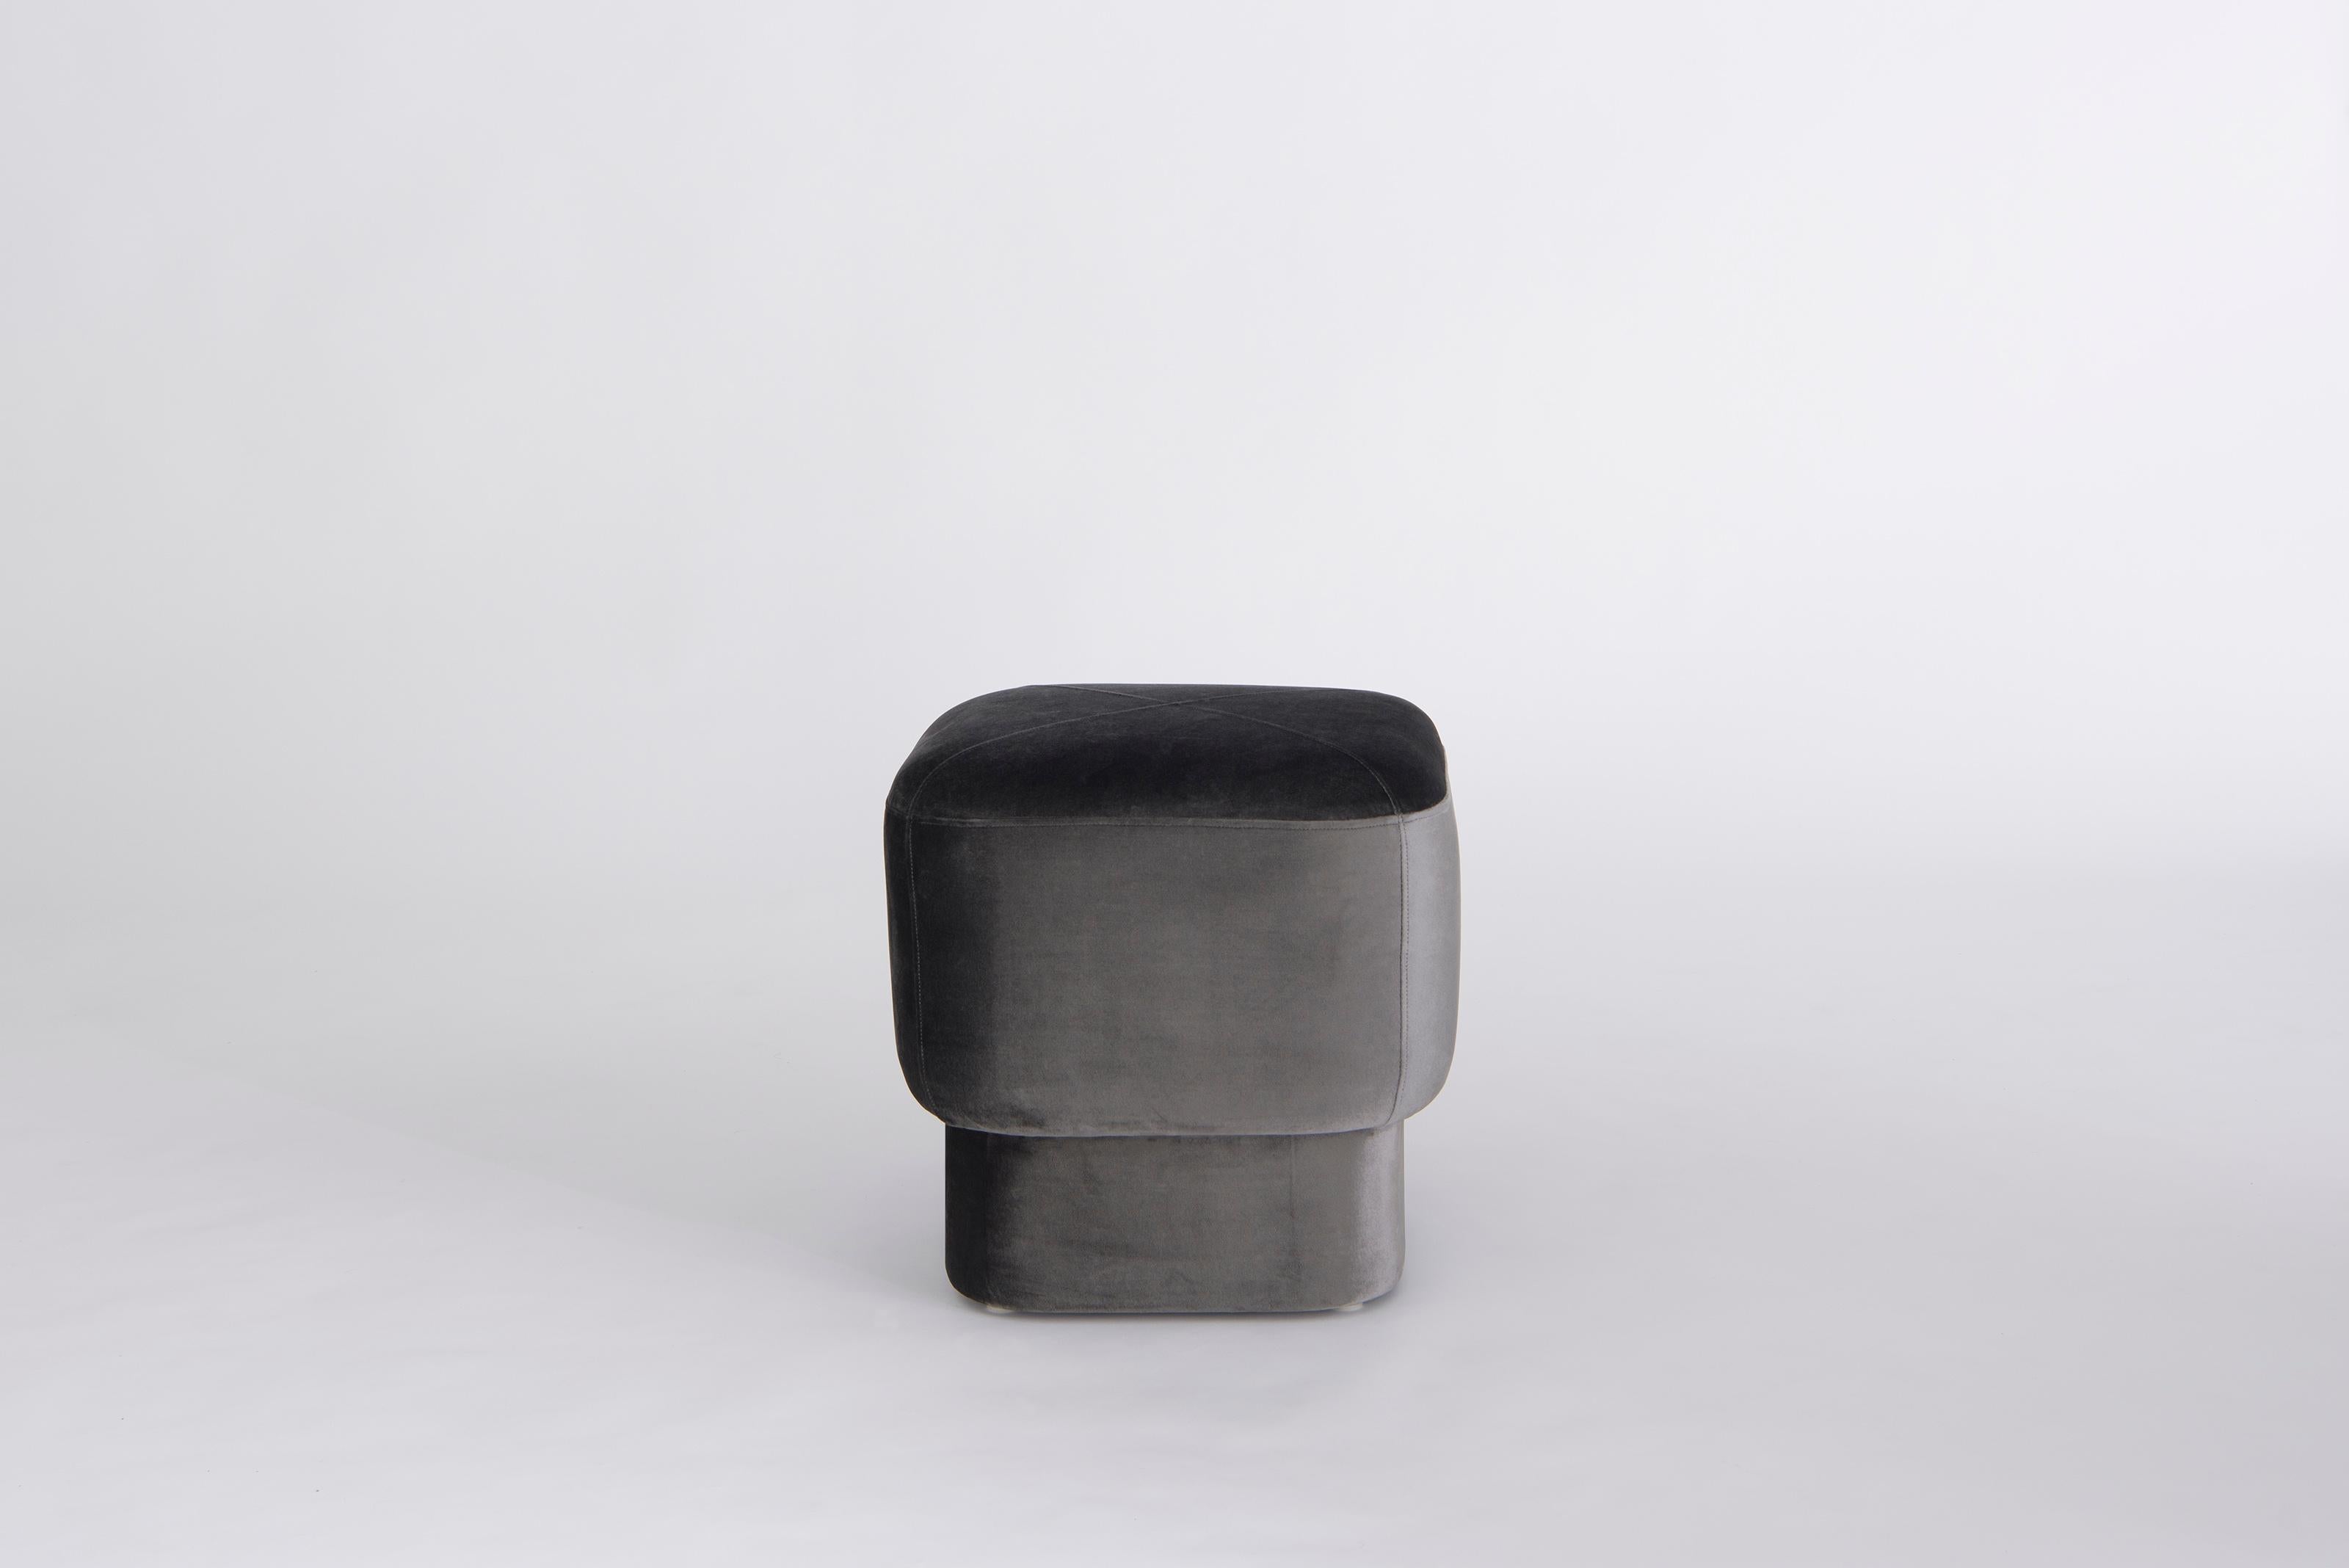 Capper Low Stool by Phase Design
Dimensions: D 45,7 x W 45,7 x H 45,7 cm. 
Materials: Upholstery.

Wood construction with upholstered body. Upholstery may be sourced in Customer Own Material (COM), Customer Own Leather (COL), or in Phase Design's